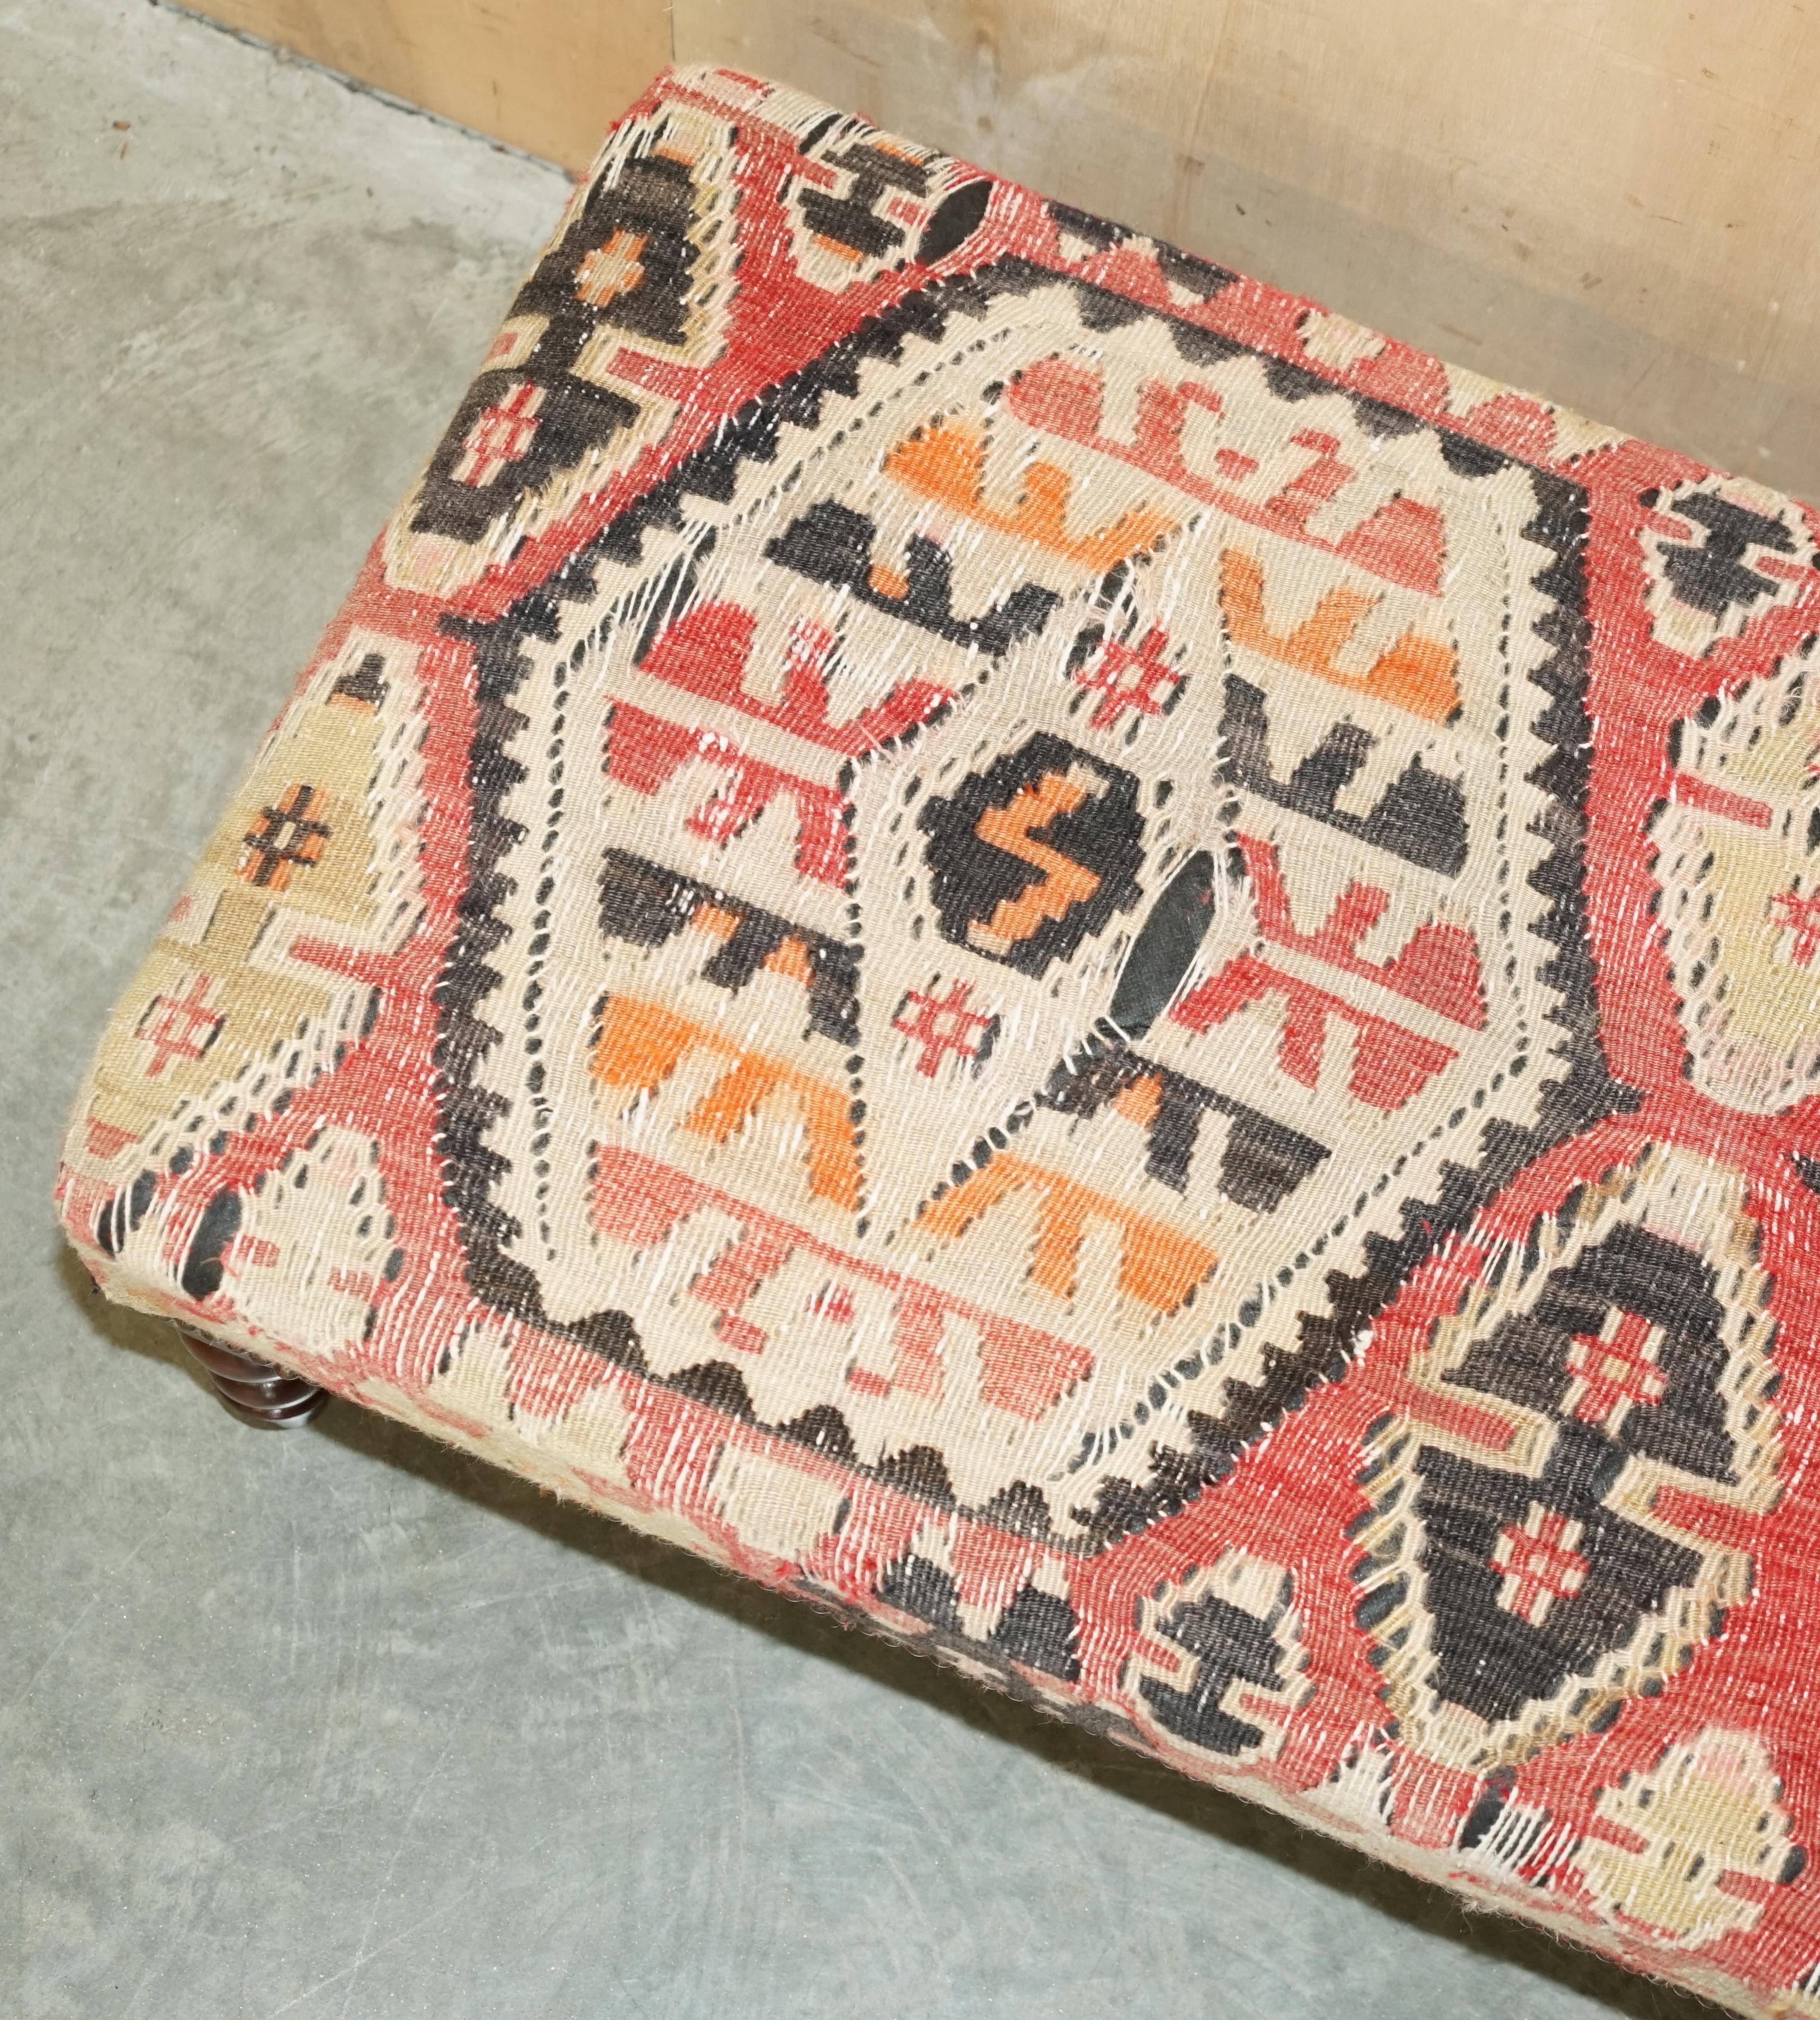 STUNNING AND COLLECTABLE ViNTAGE GEORGE SMITH CHELSEA KILIM FOOTSTOOL OTTOMAN 3